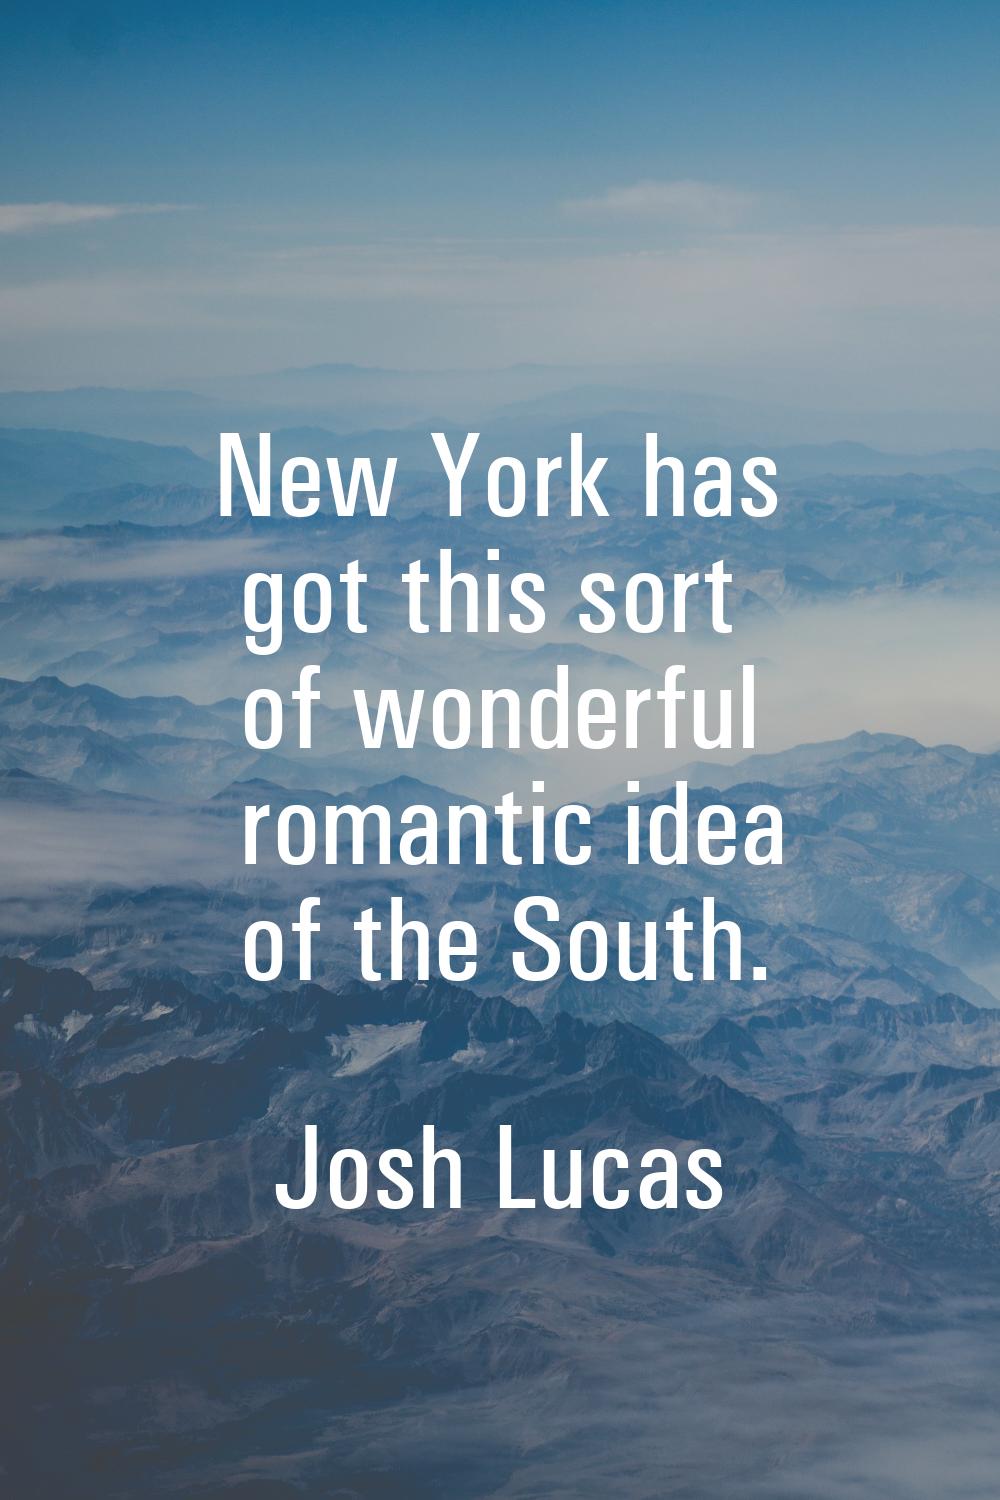 New York has got this sort of wonderful romantic idea of the South.